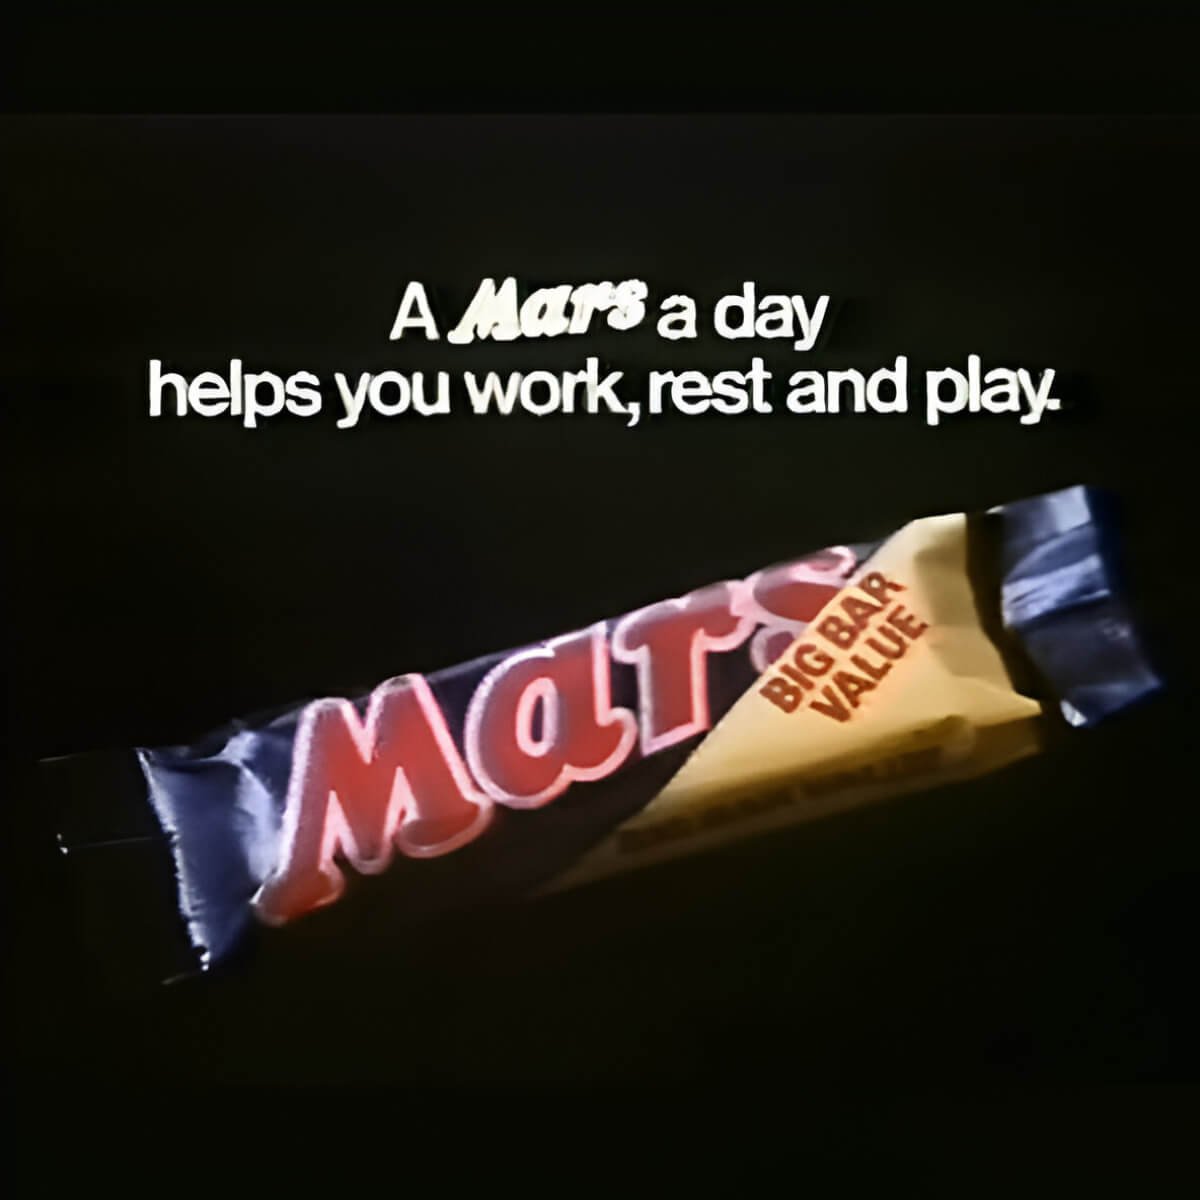 Mars Bar Adverts Through The Years